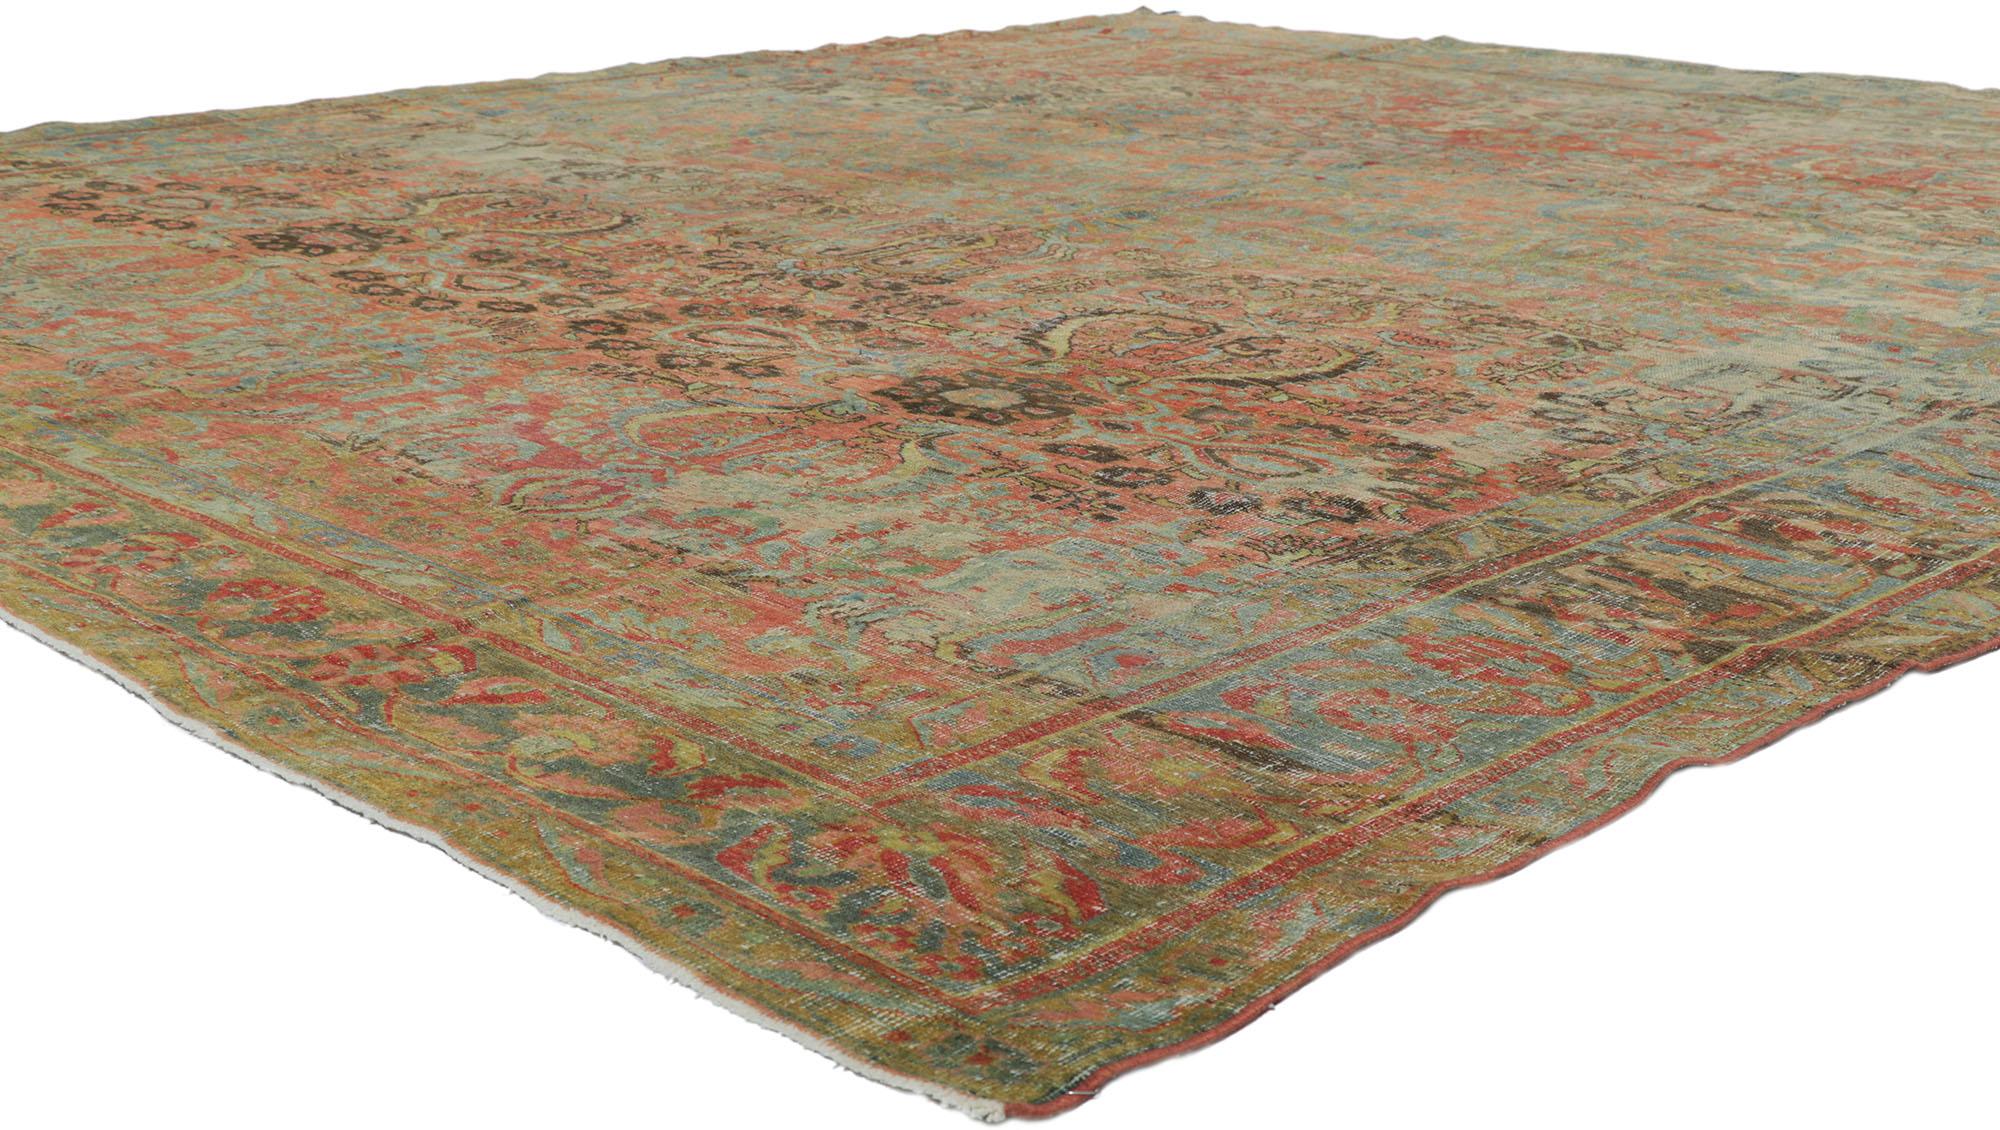 53694 Distressed antique Persian Mahal rug 09'09 x 11'00. Effortless beauty combined with rustic sensibility, this hand-knotted wool distressed antique Persian Mahal rug is poised to impress with its modern rustic English style. The distressed red